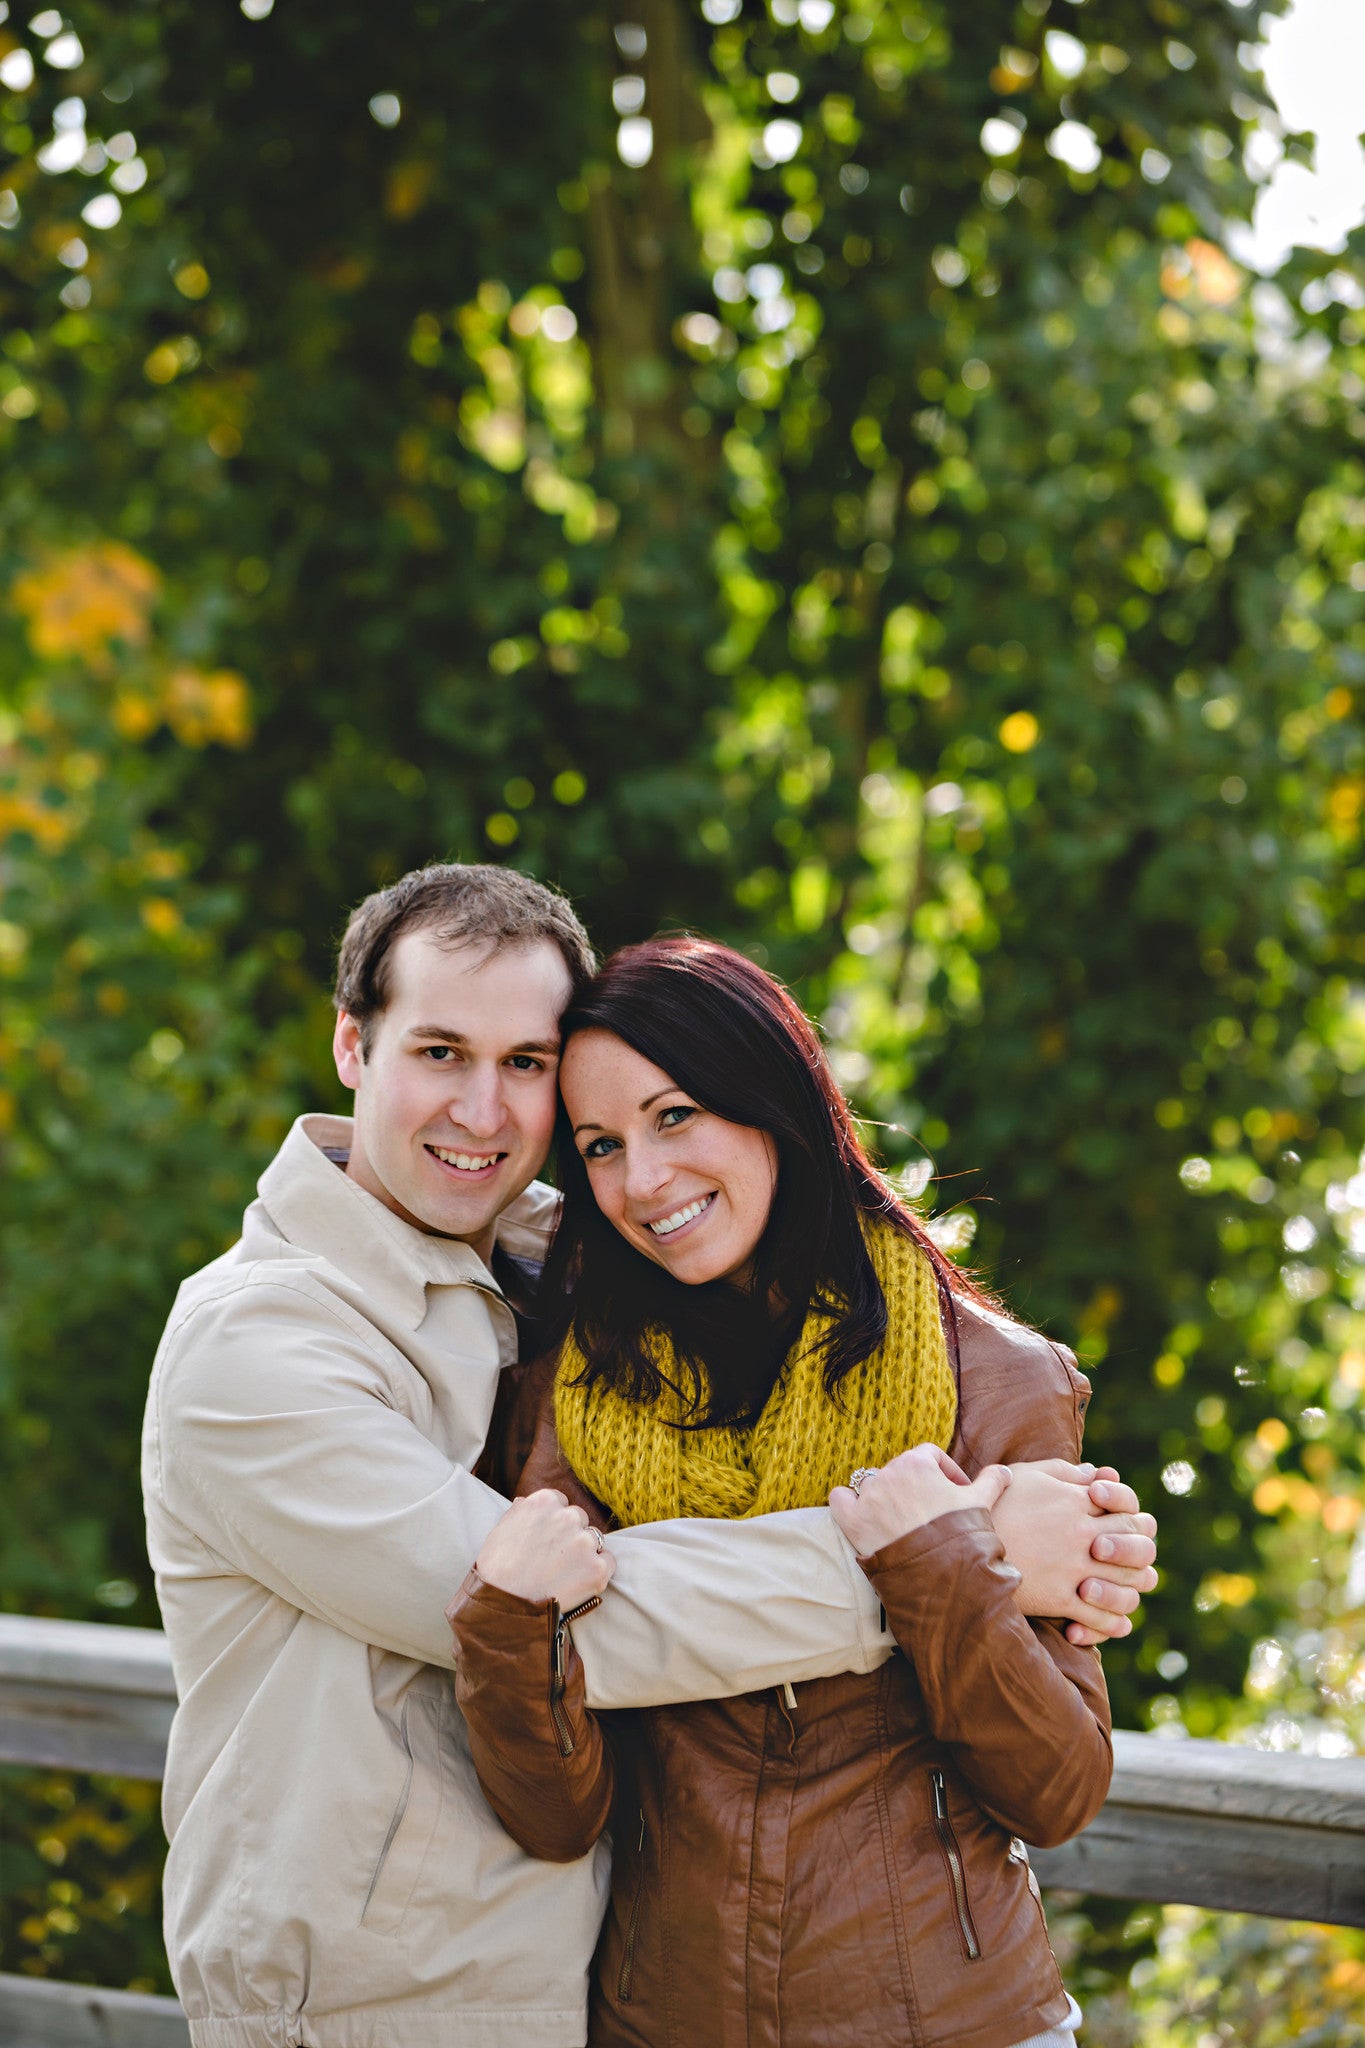 8 Tips for Nailing Your Engagement Photos | Junebug Weddings